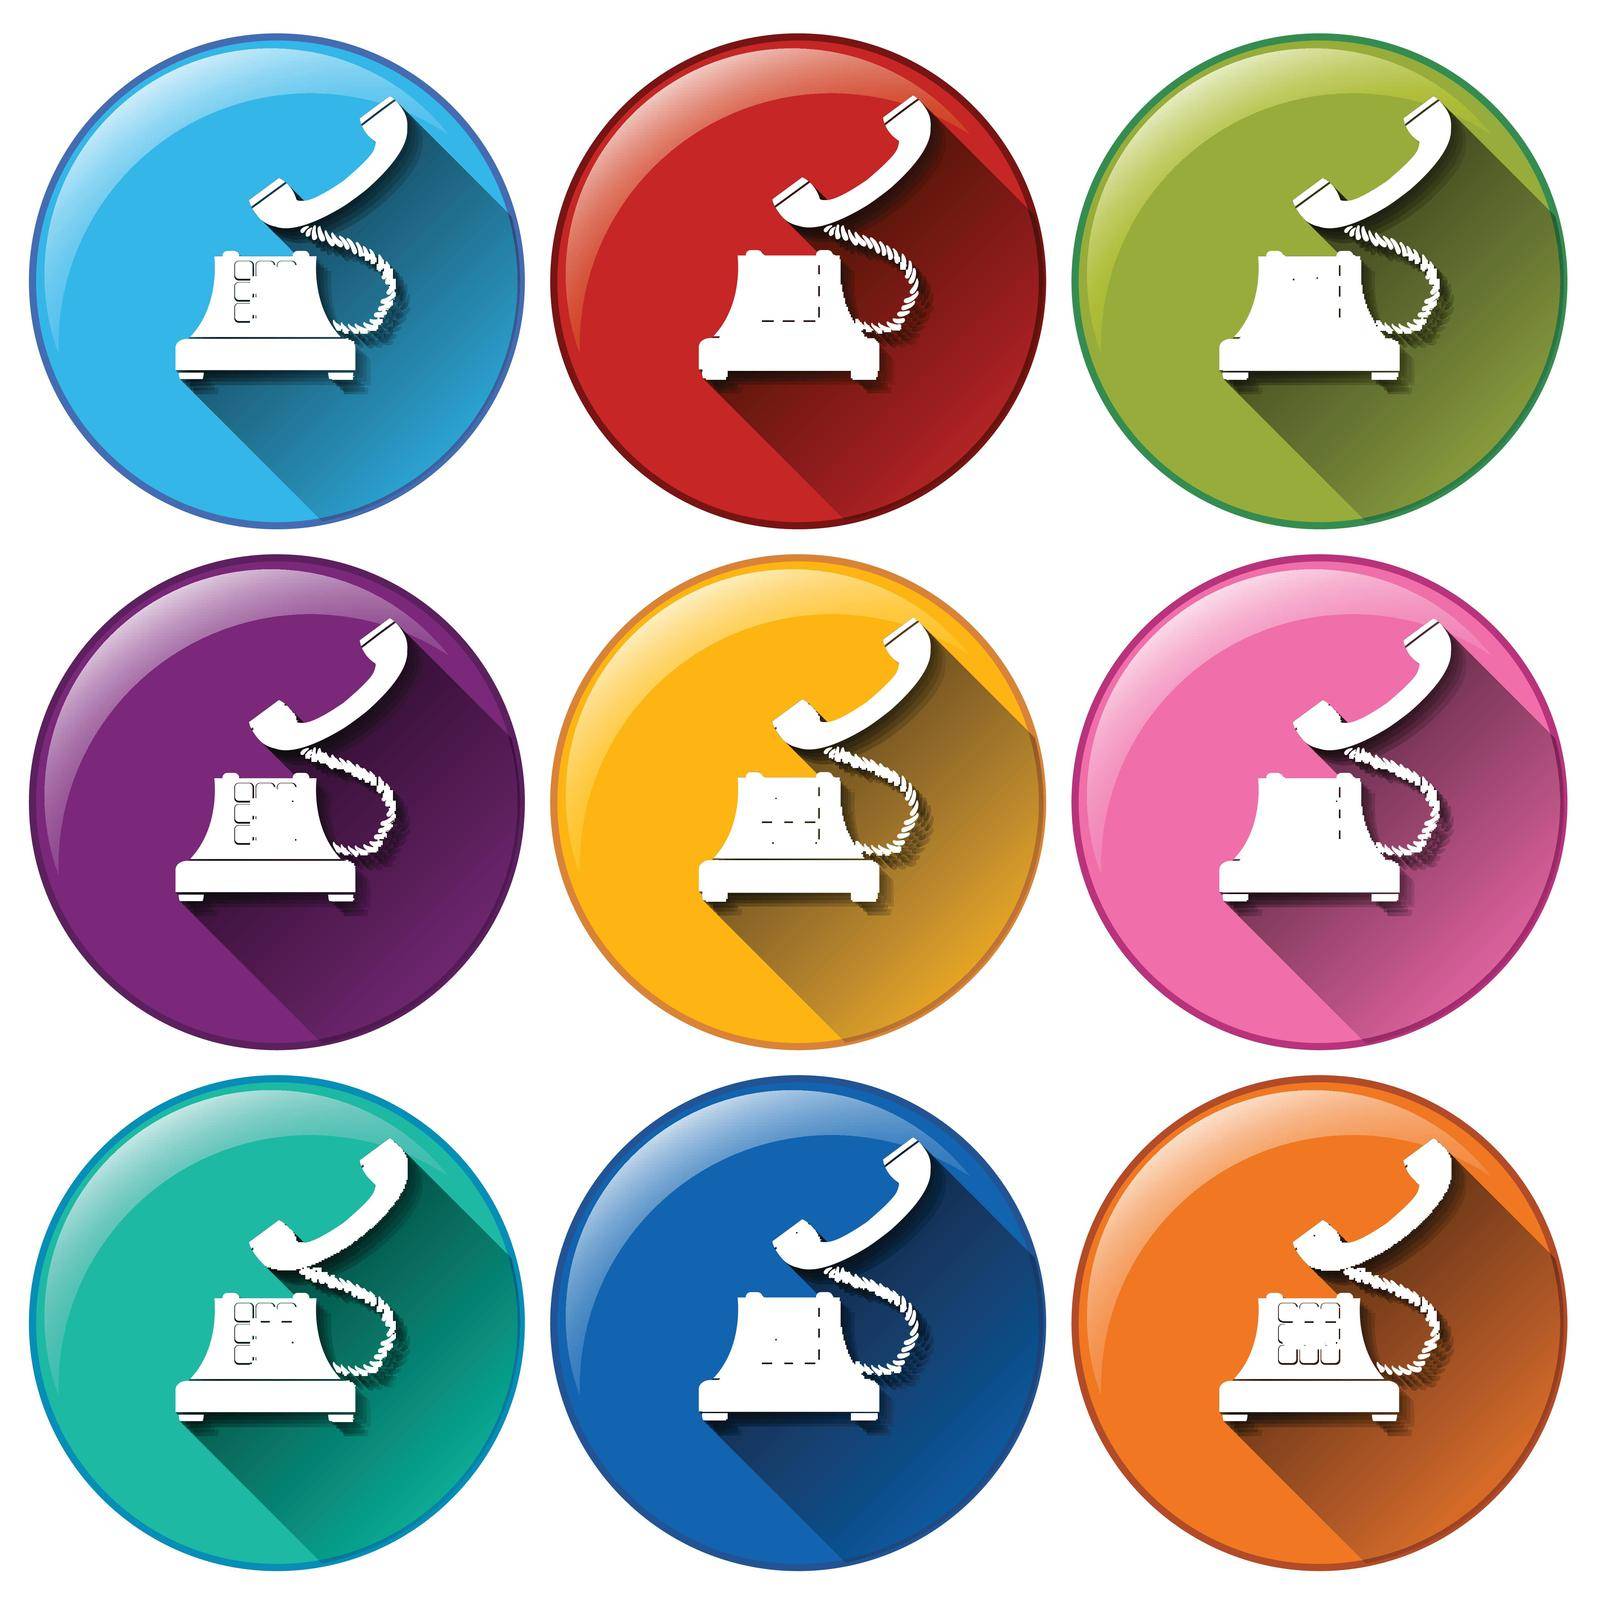 Illustration of the telephone icons on a white background